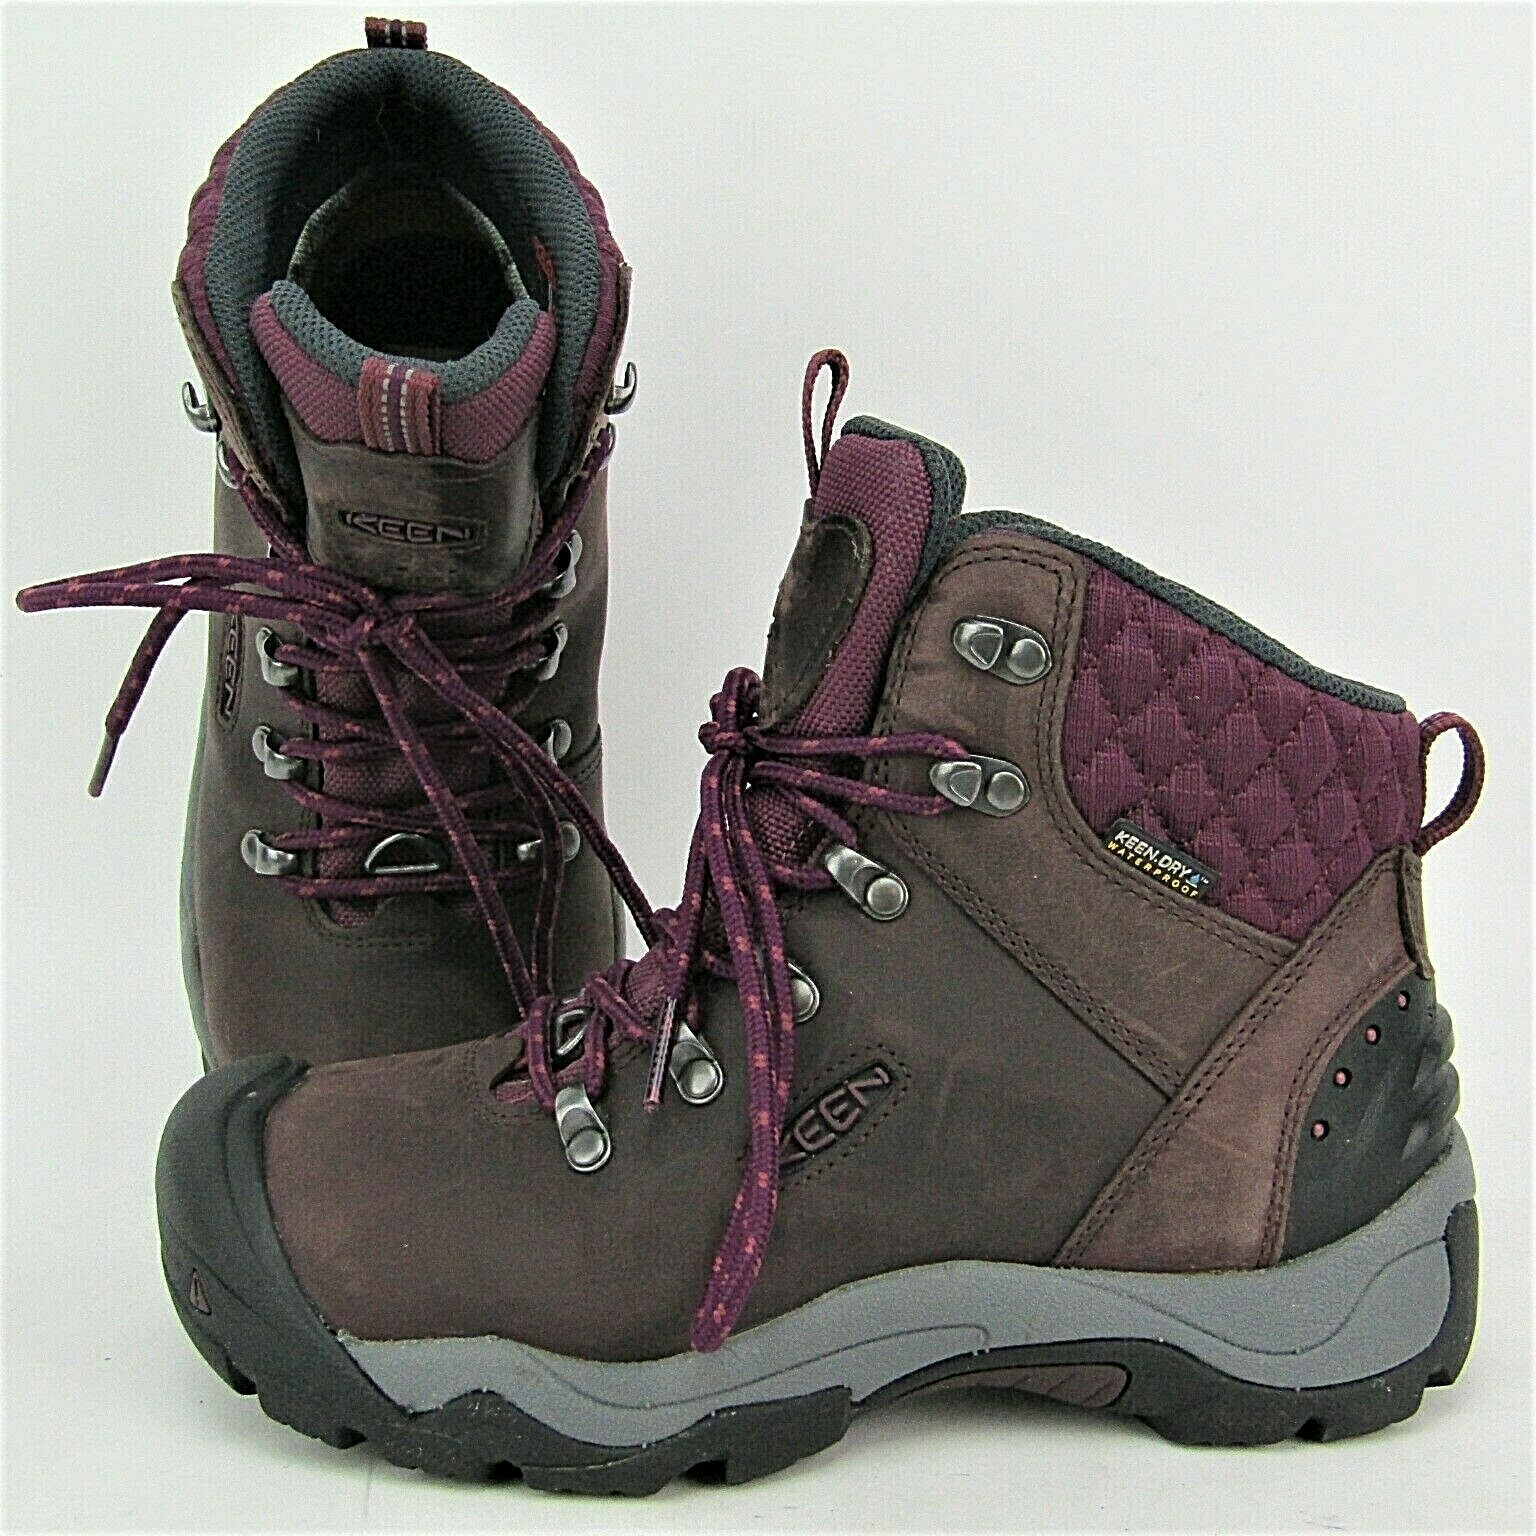 Keen Revel III Boots Womens 5.5 W Wide Purple Leather Lace Up Hiking Ankle